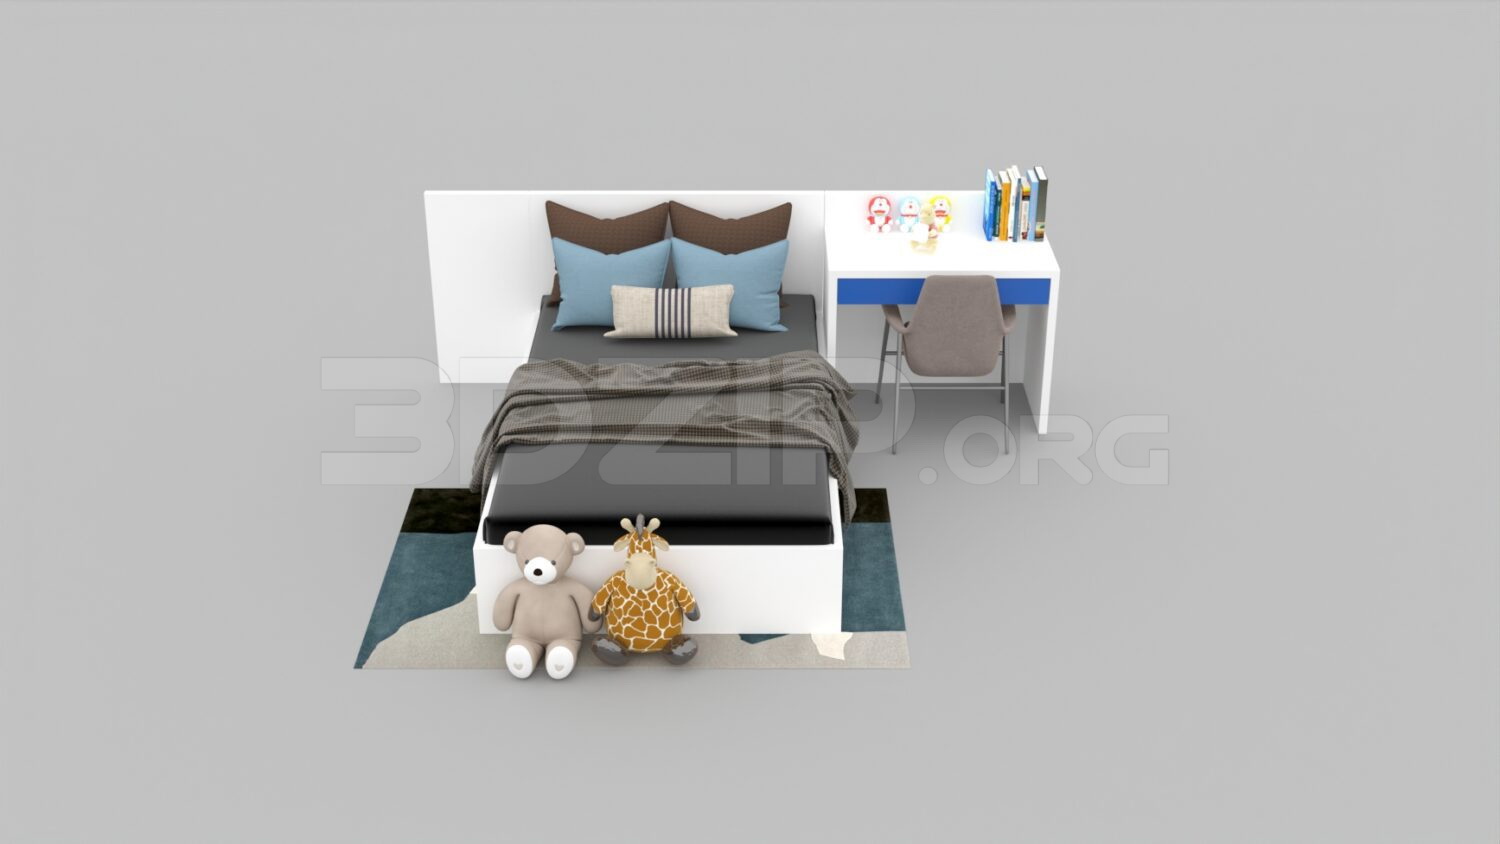 2511. Download Free Bed Model By Thanh Cong